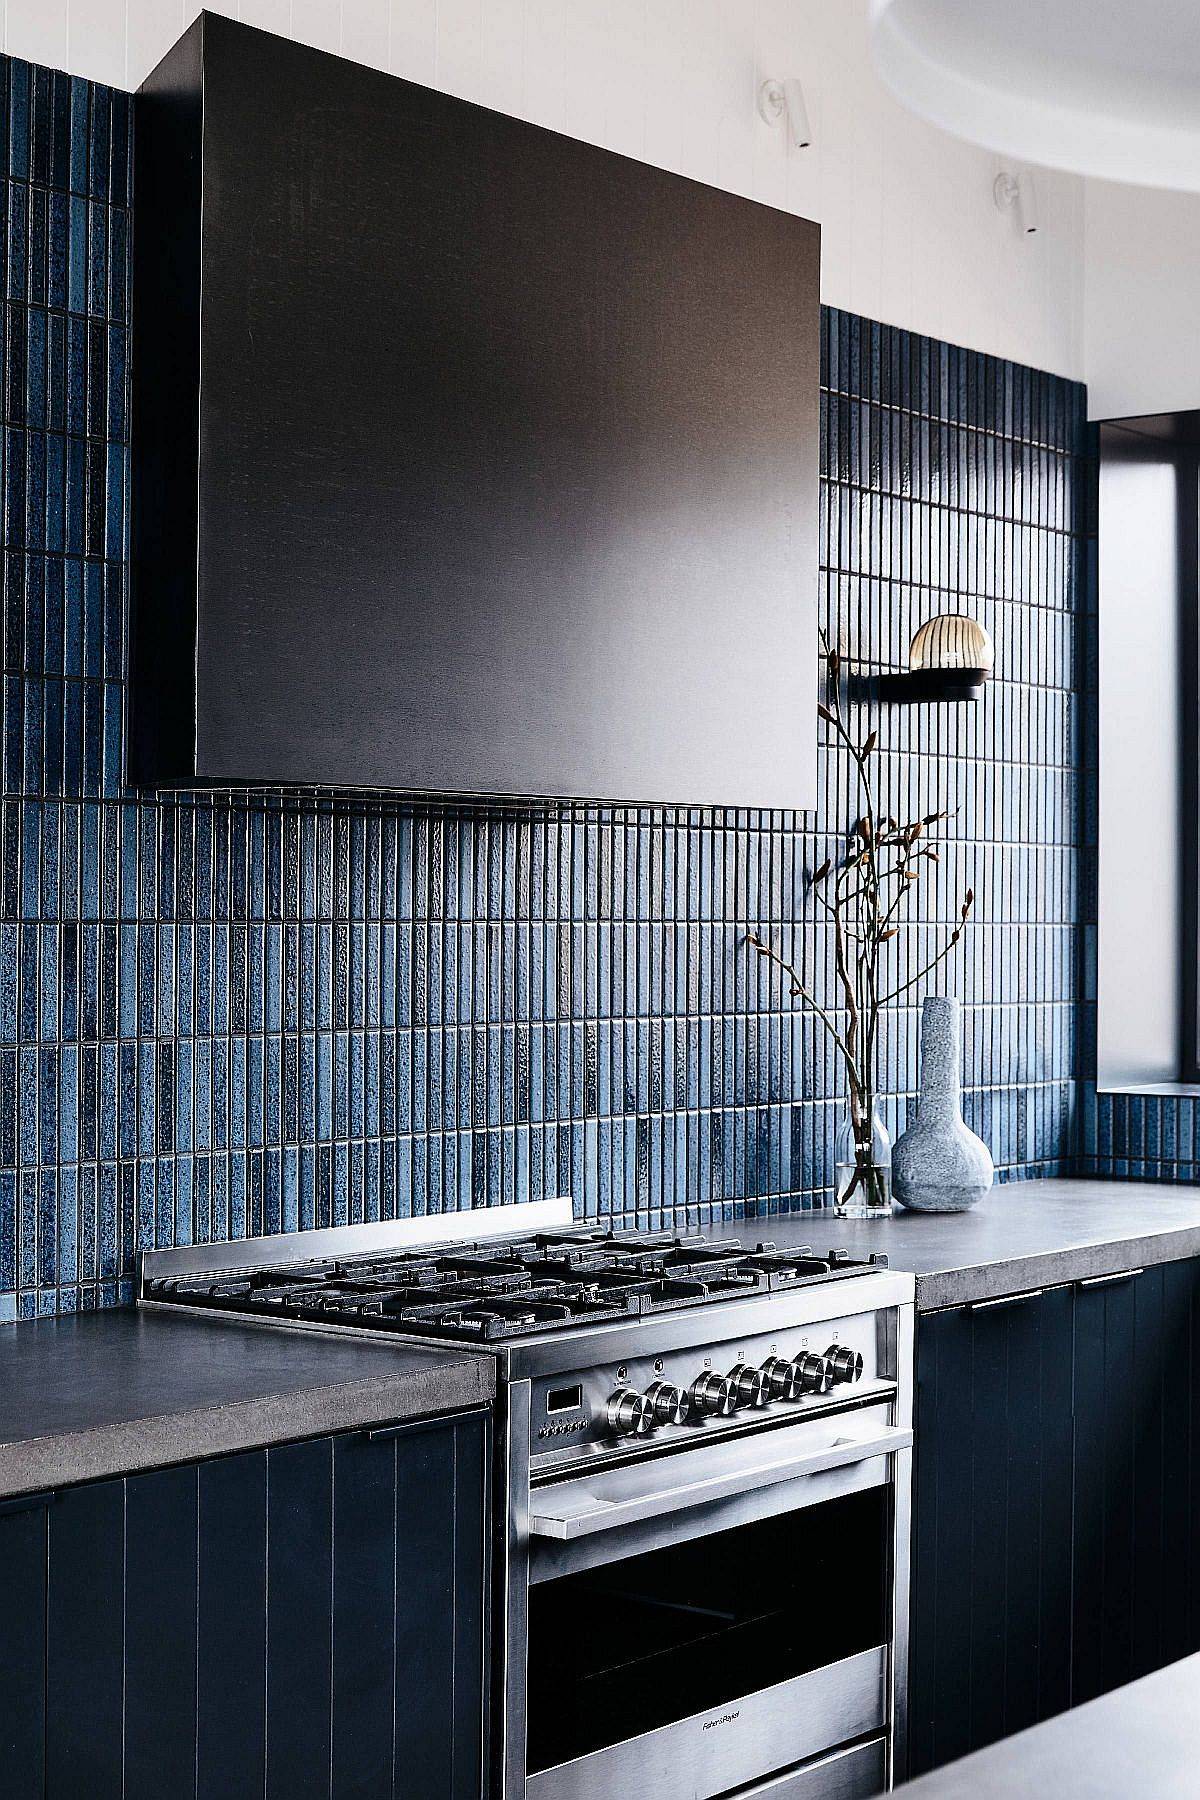 Different-shades-of-blue-brought-in-by-the-vertical-tile-backsplash-make-a-big-visual-impact-57808